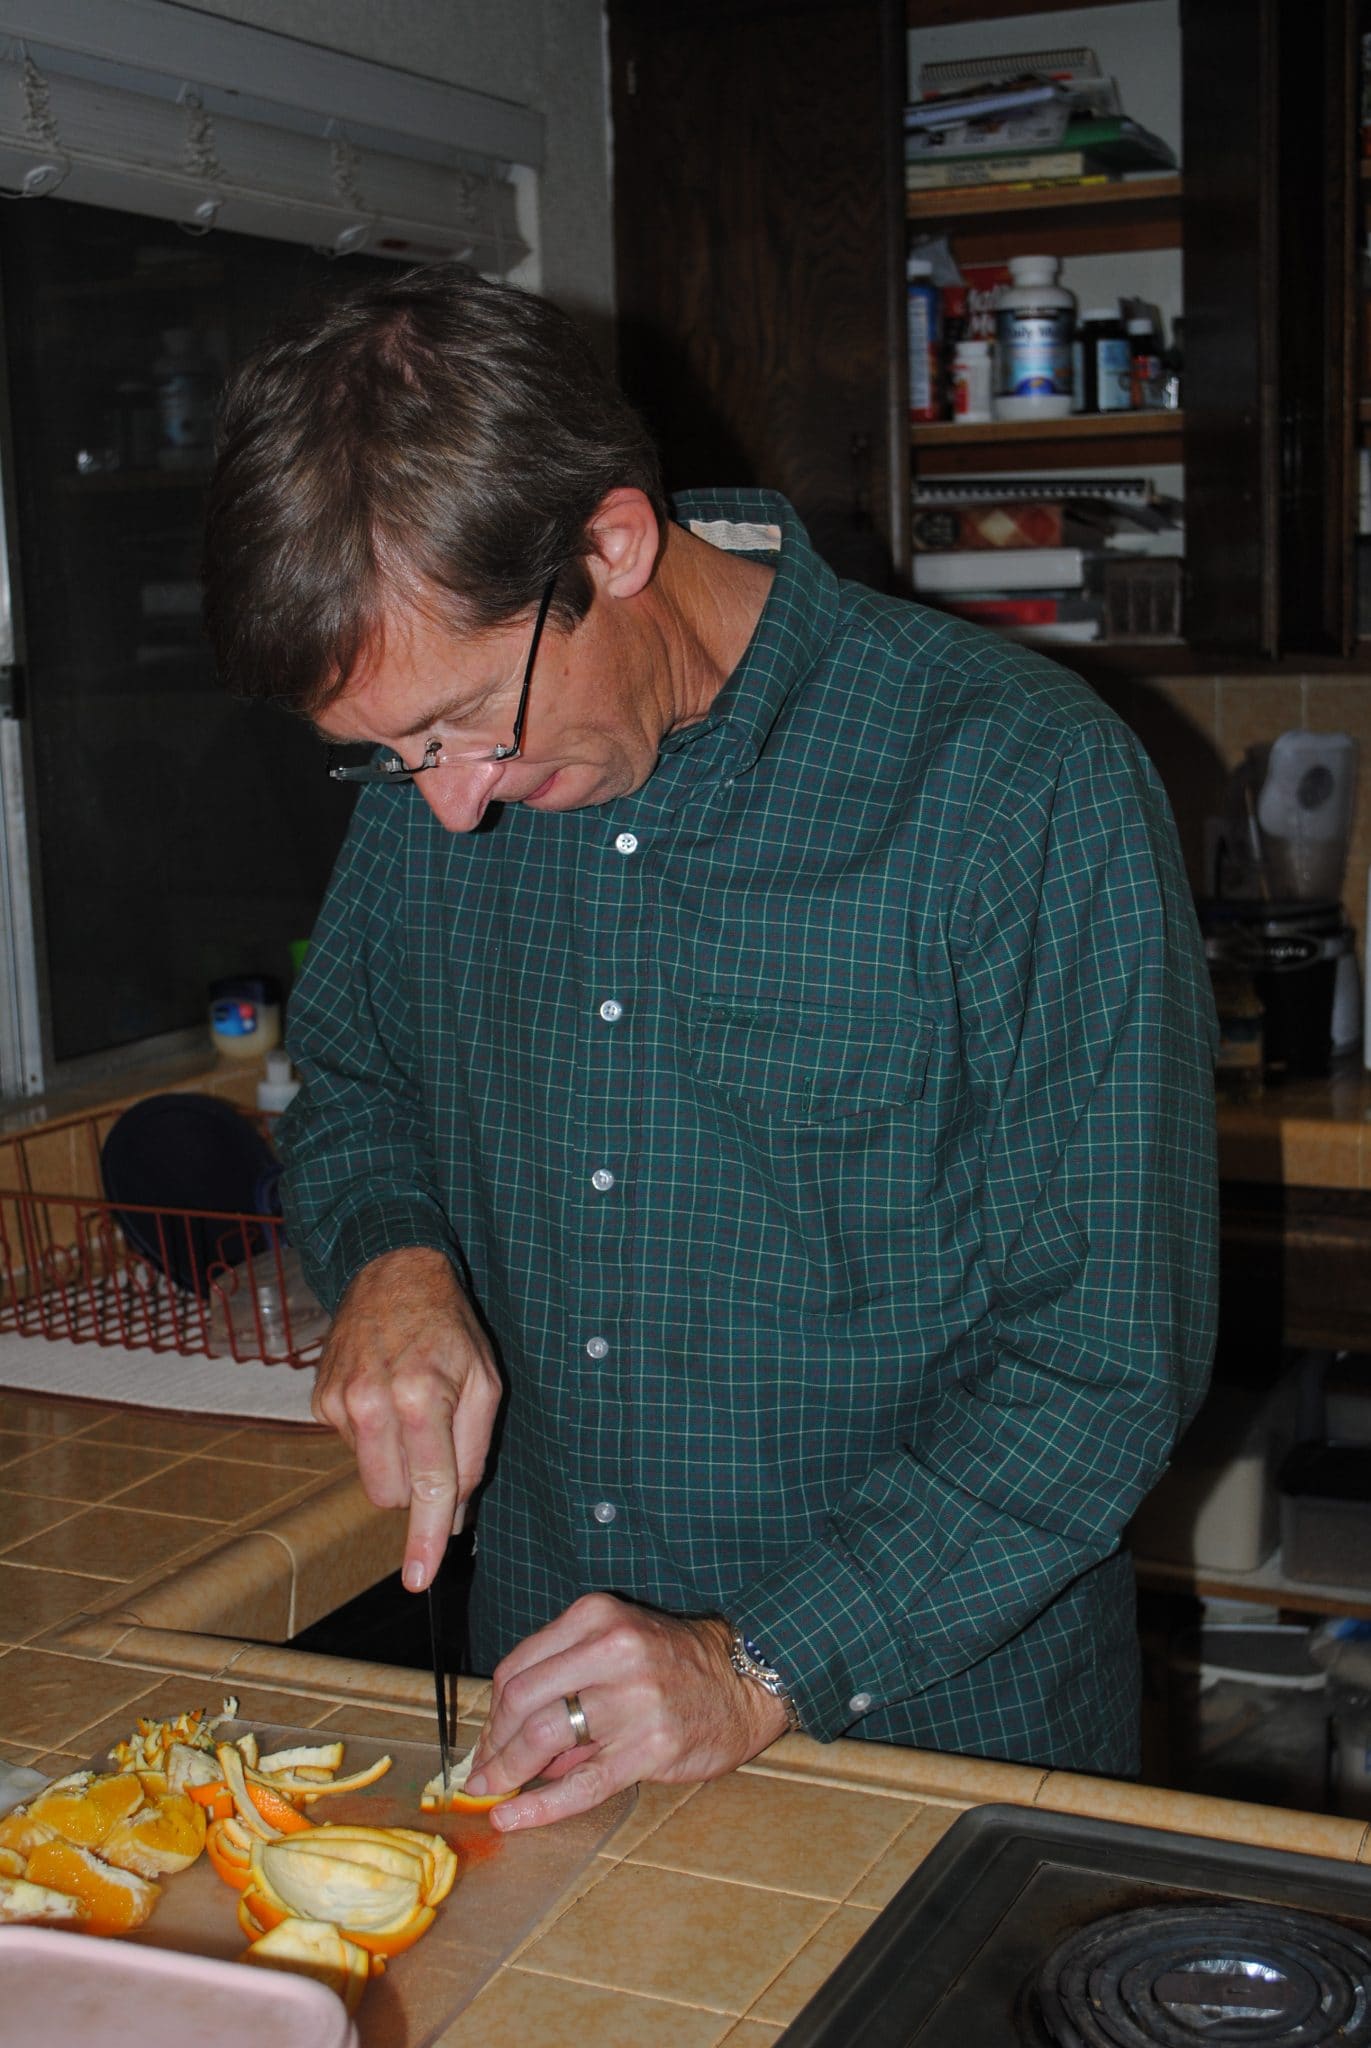 A man uses a knife to cut some cannoli.